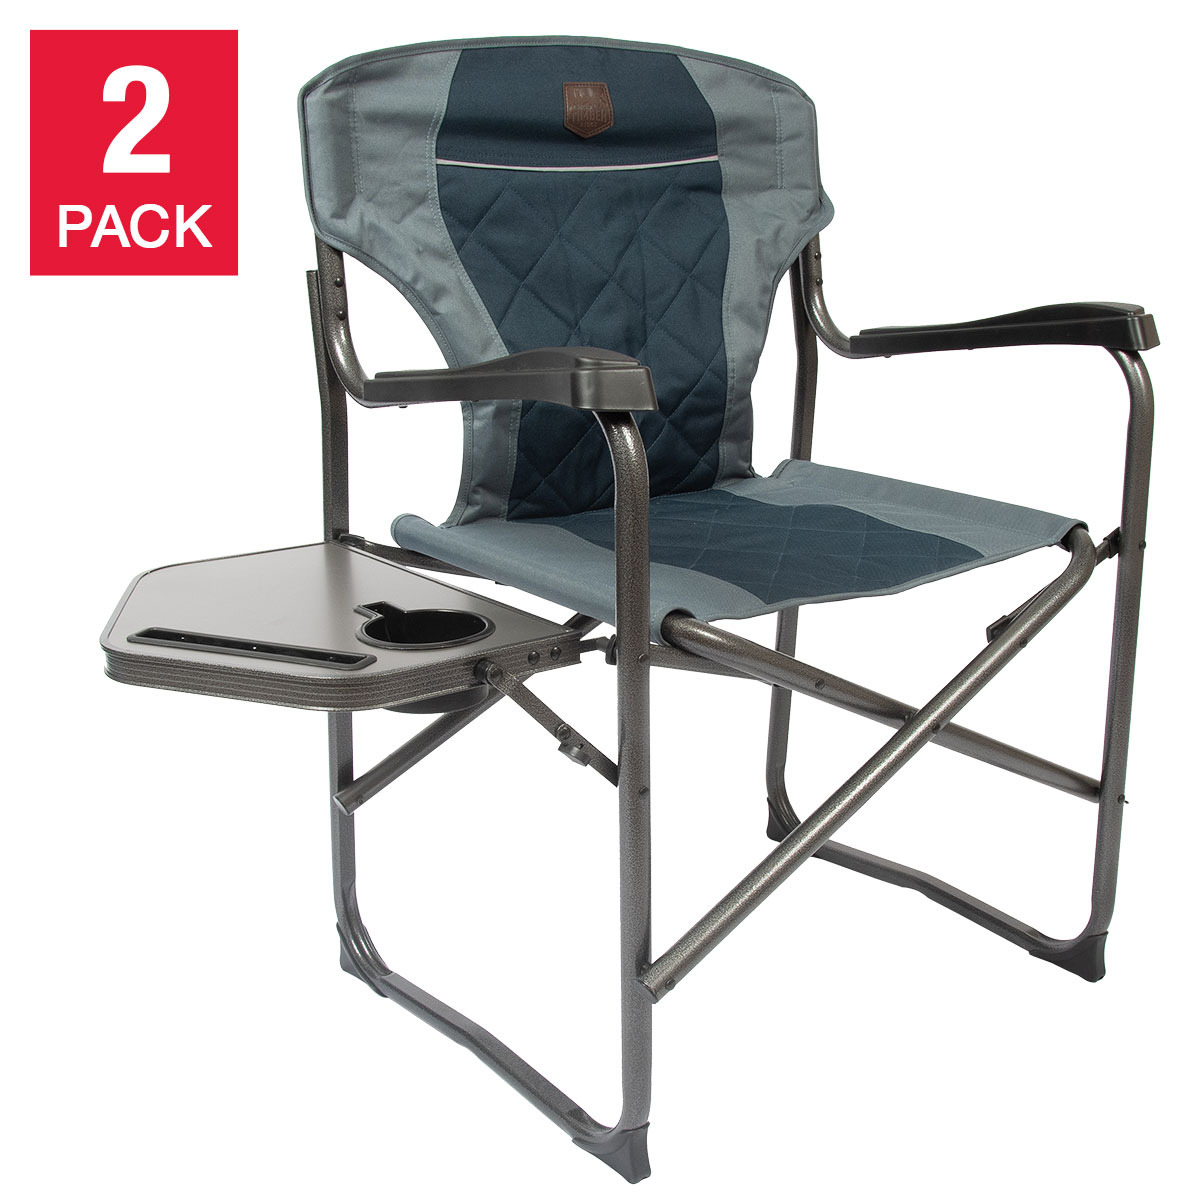 2-Pack Portable Folding Director\'s Chair, Camping, Outdoor, Timber Ridge NEW